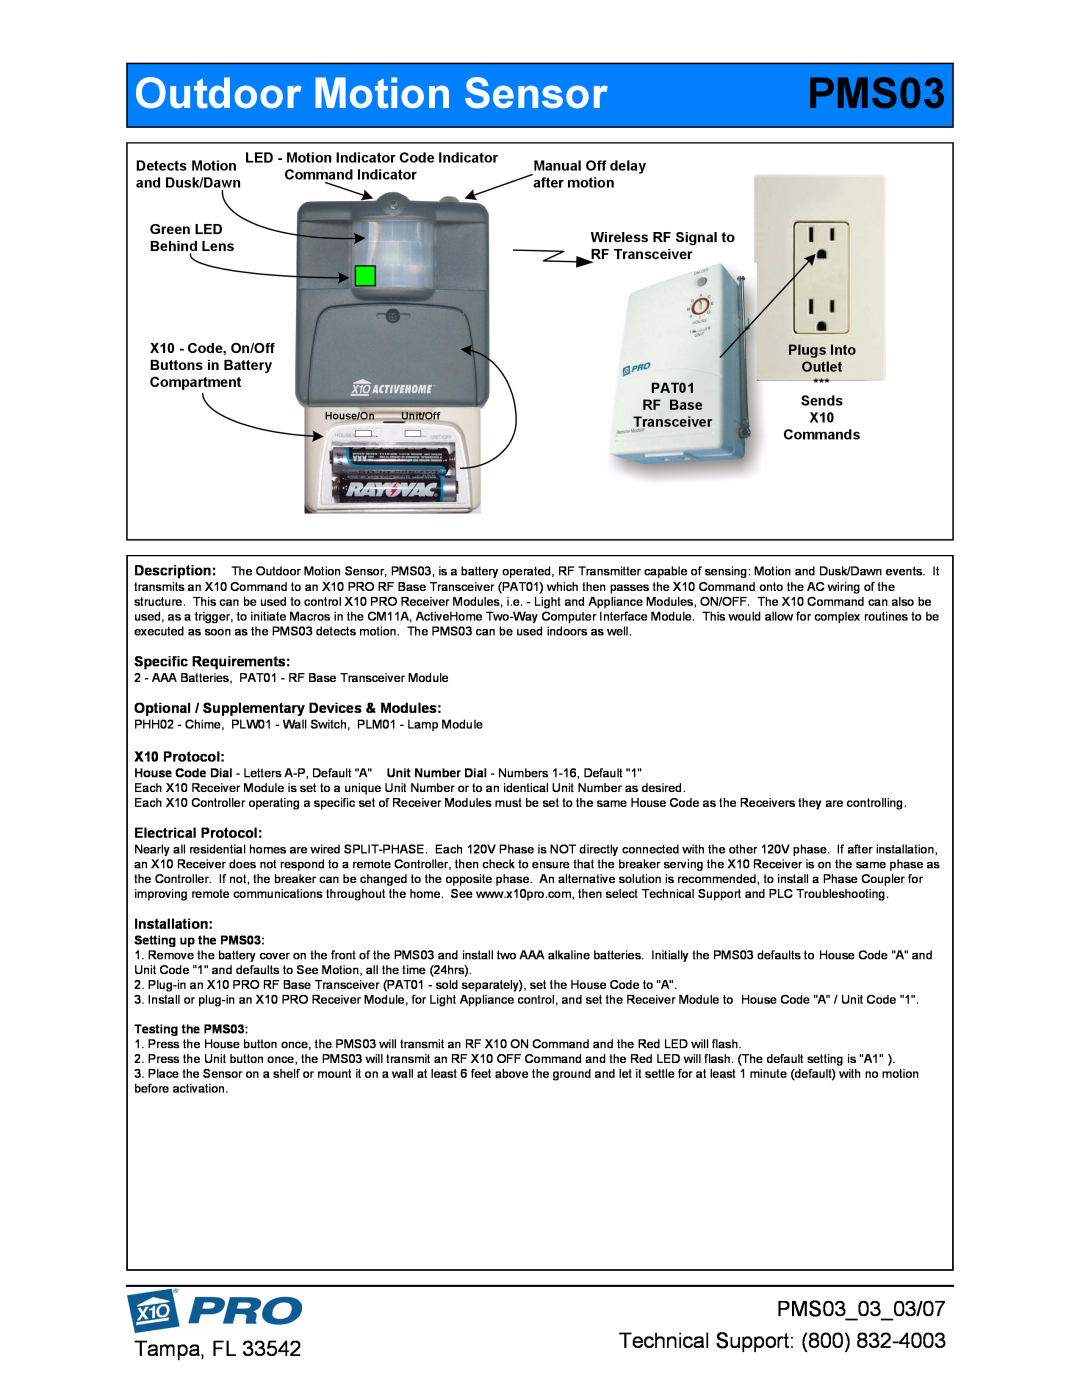 HomeTech manual Outdoor Motion Sensor, PMS03 03 03/07, Tampa, FL, Technical Support 